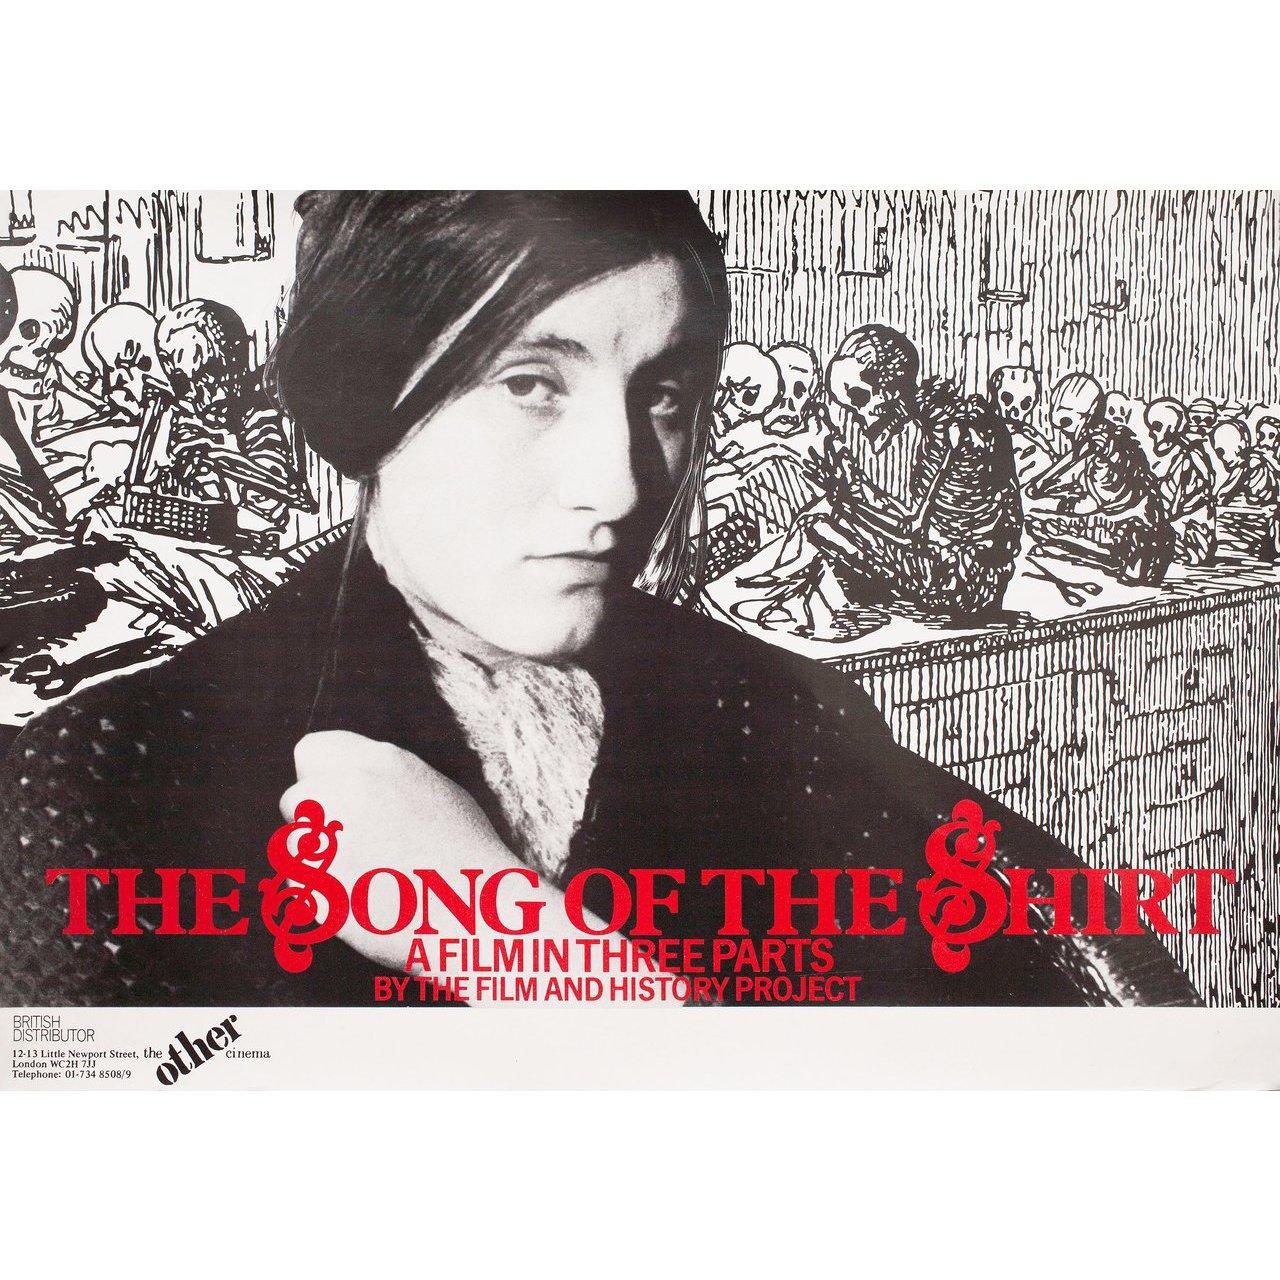 Original 1979 British double crown poster for the film Song of the Shirt (The Song of the Shirt) directed by Susan Clayton / Jonathan Curling with Richard Barnett / Robbie Barnett / Paul Bentall / Bob Biddiscombe. Very good-fine condition, rolled.